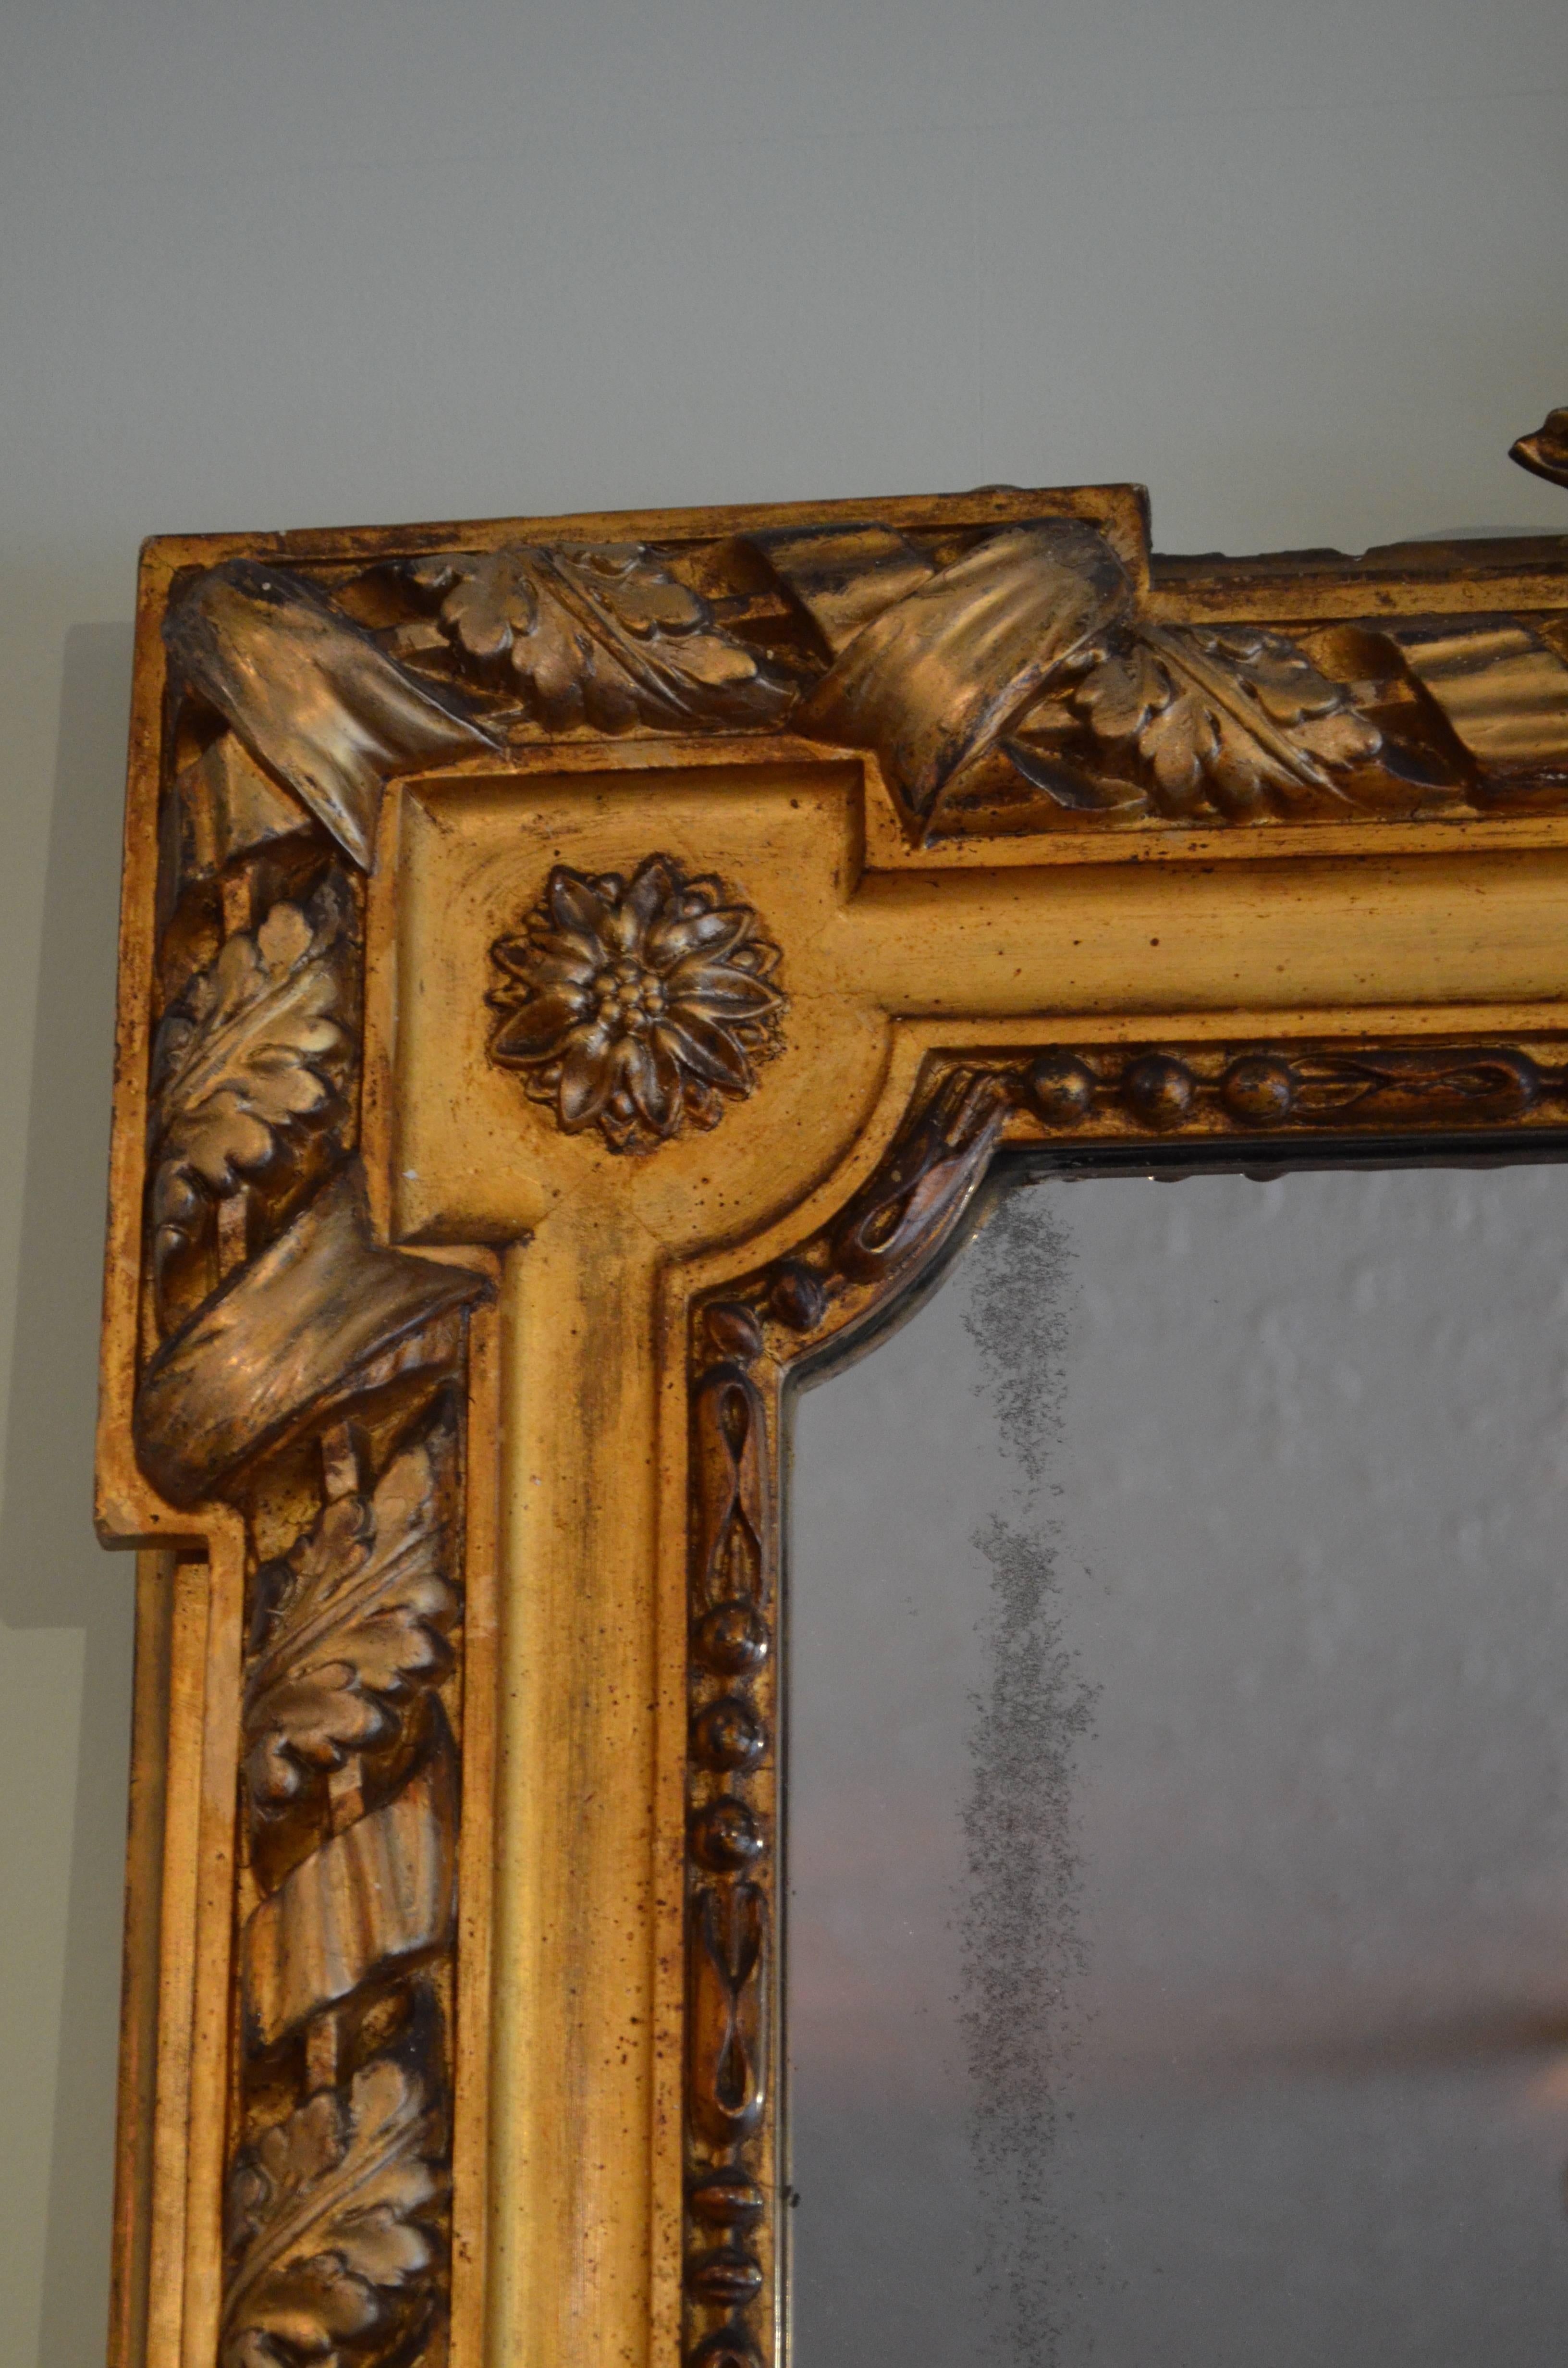 Sn4002 A striking 19th century gilt mirror, having foliage cresting to center and original mirror plate (with some silvering) in acanthus carved moulded frame.
This exceptional mirror retains original gilt, mirror plate and backboards, all in